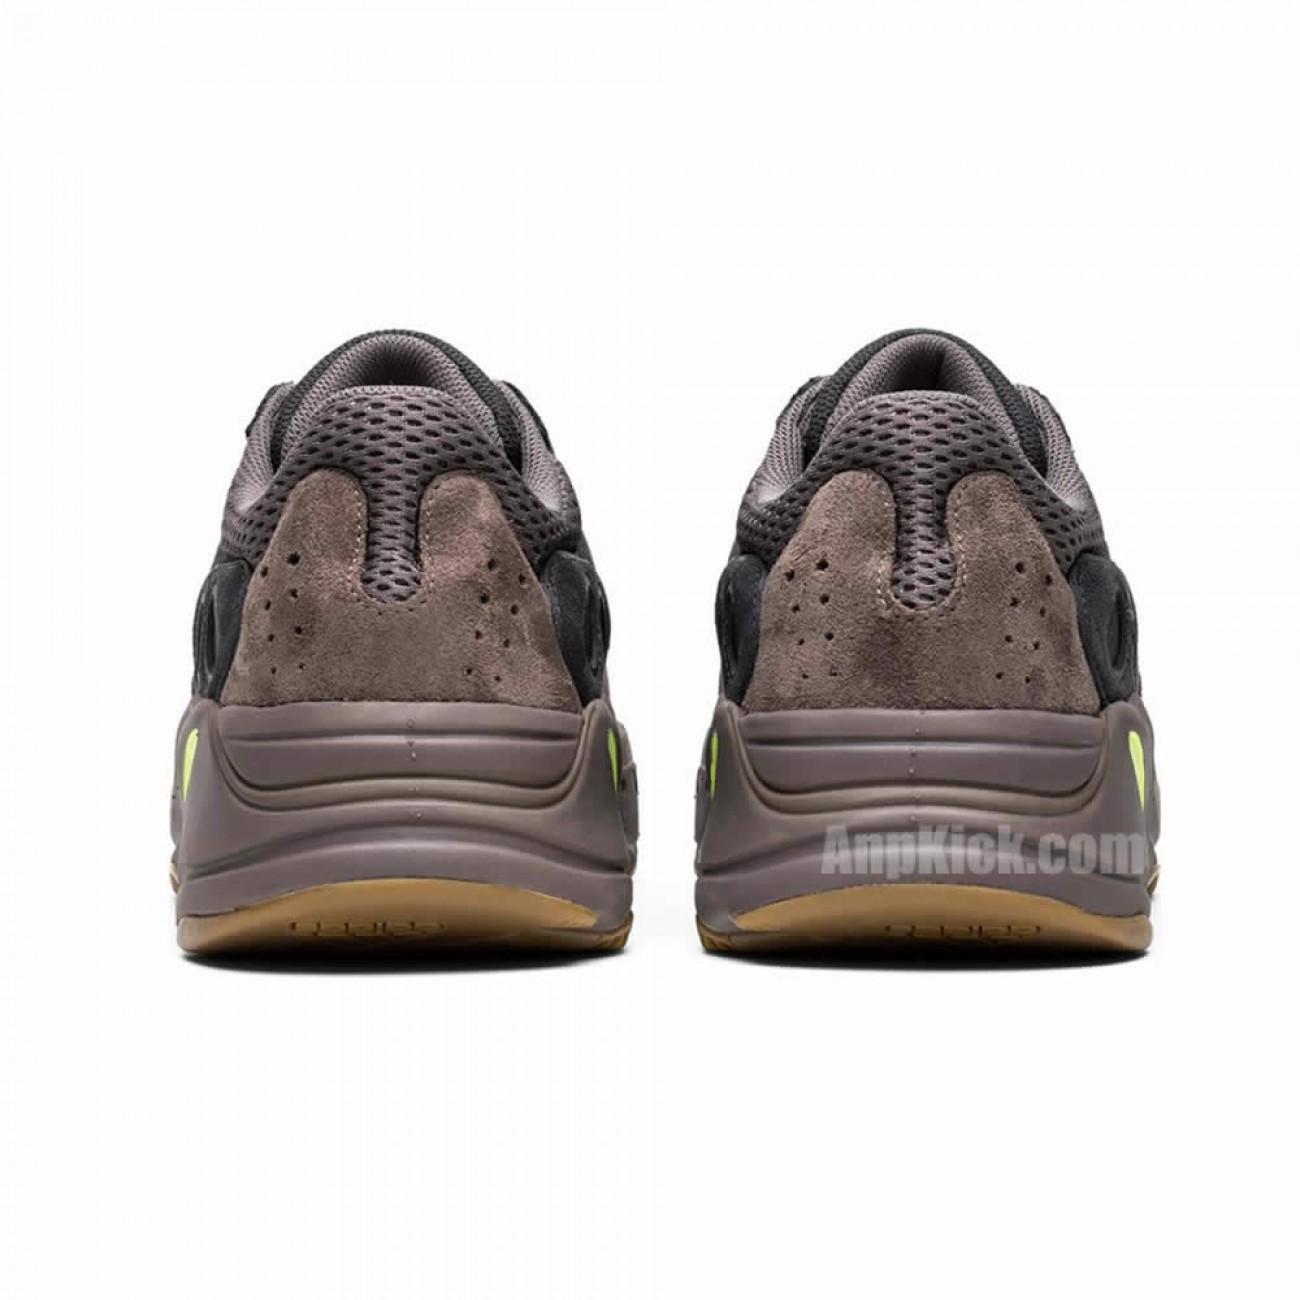 Adidas Yeezy Boost 700 "Mauve" On Feet Release Date Price For Sale EE9614